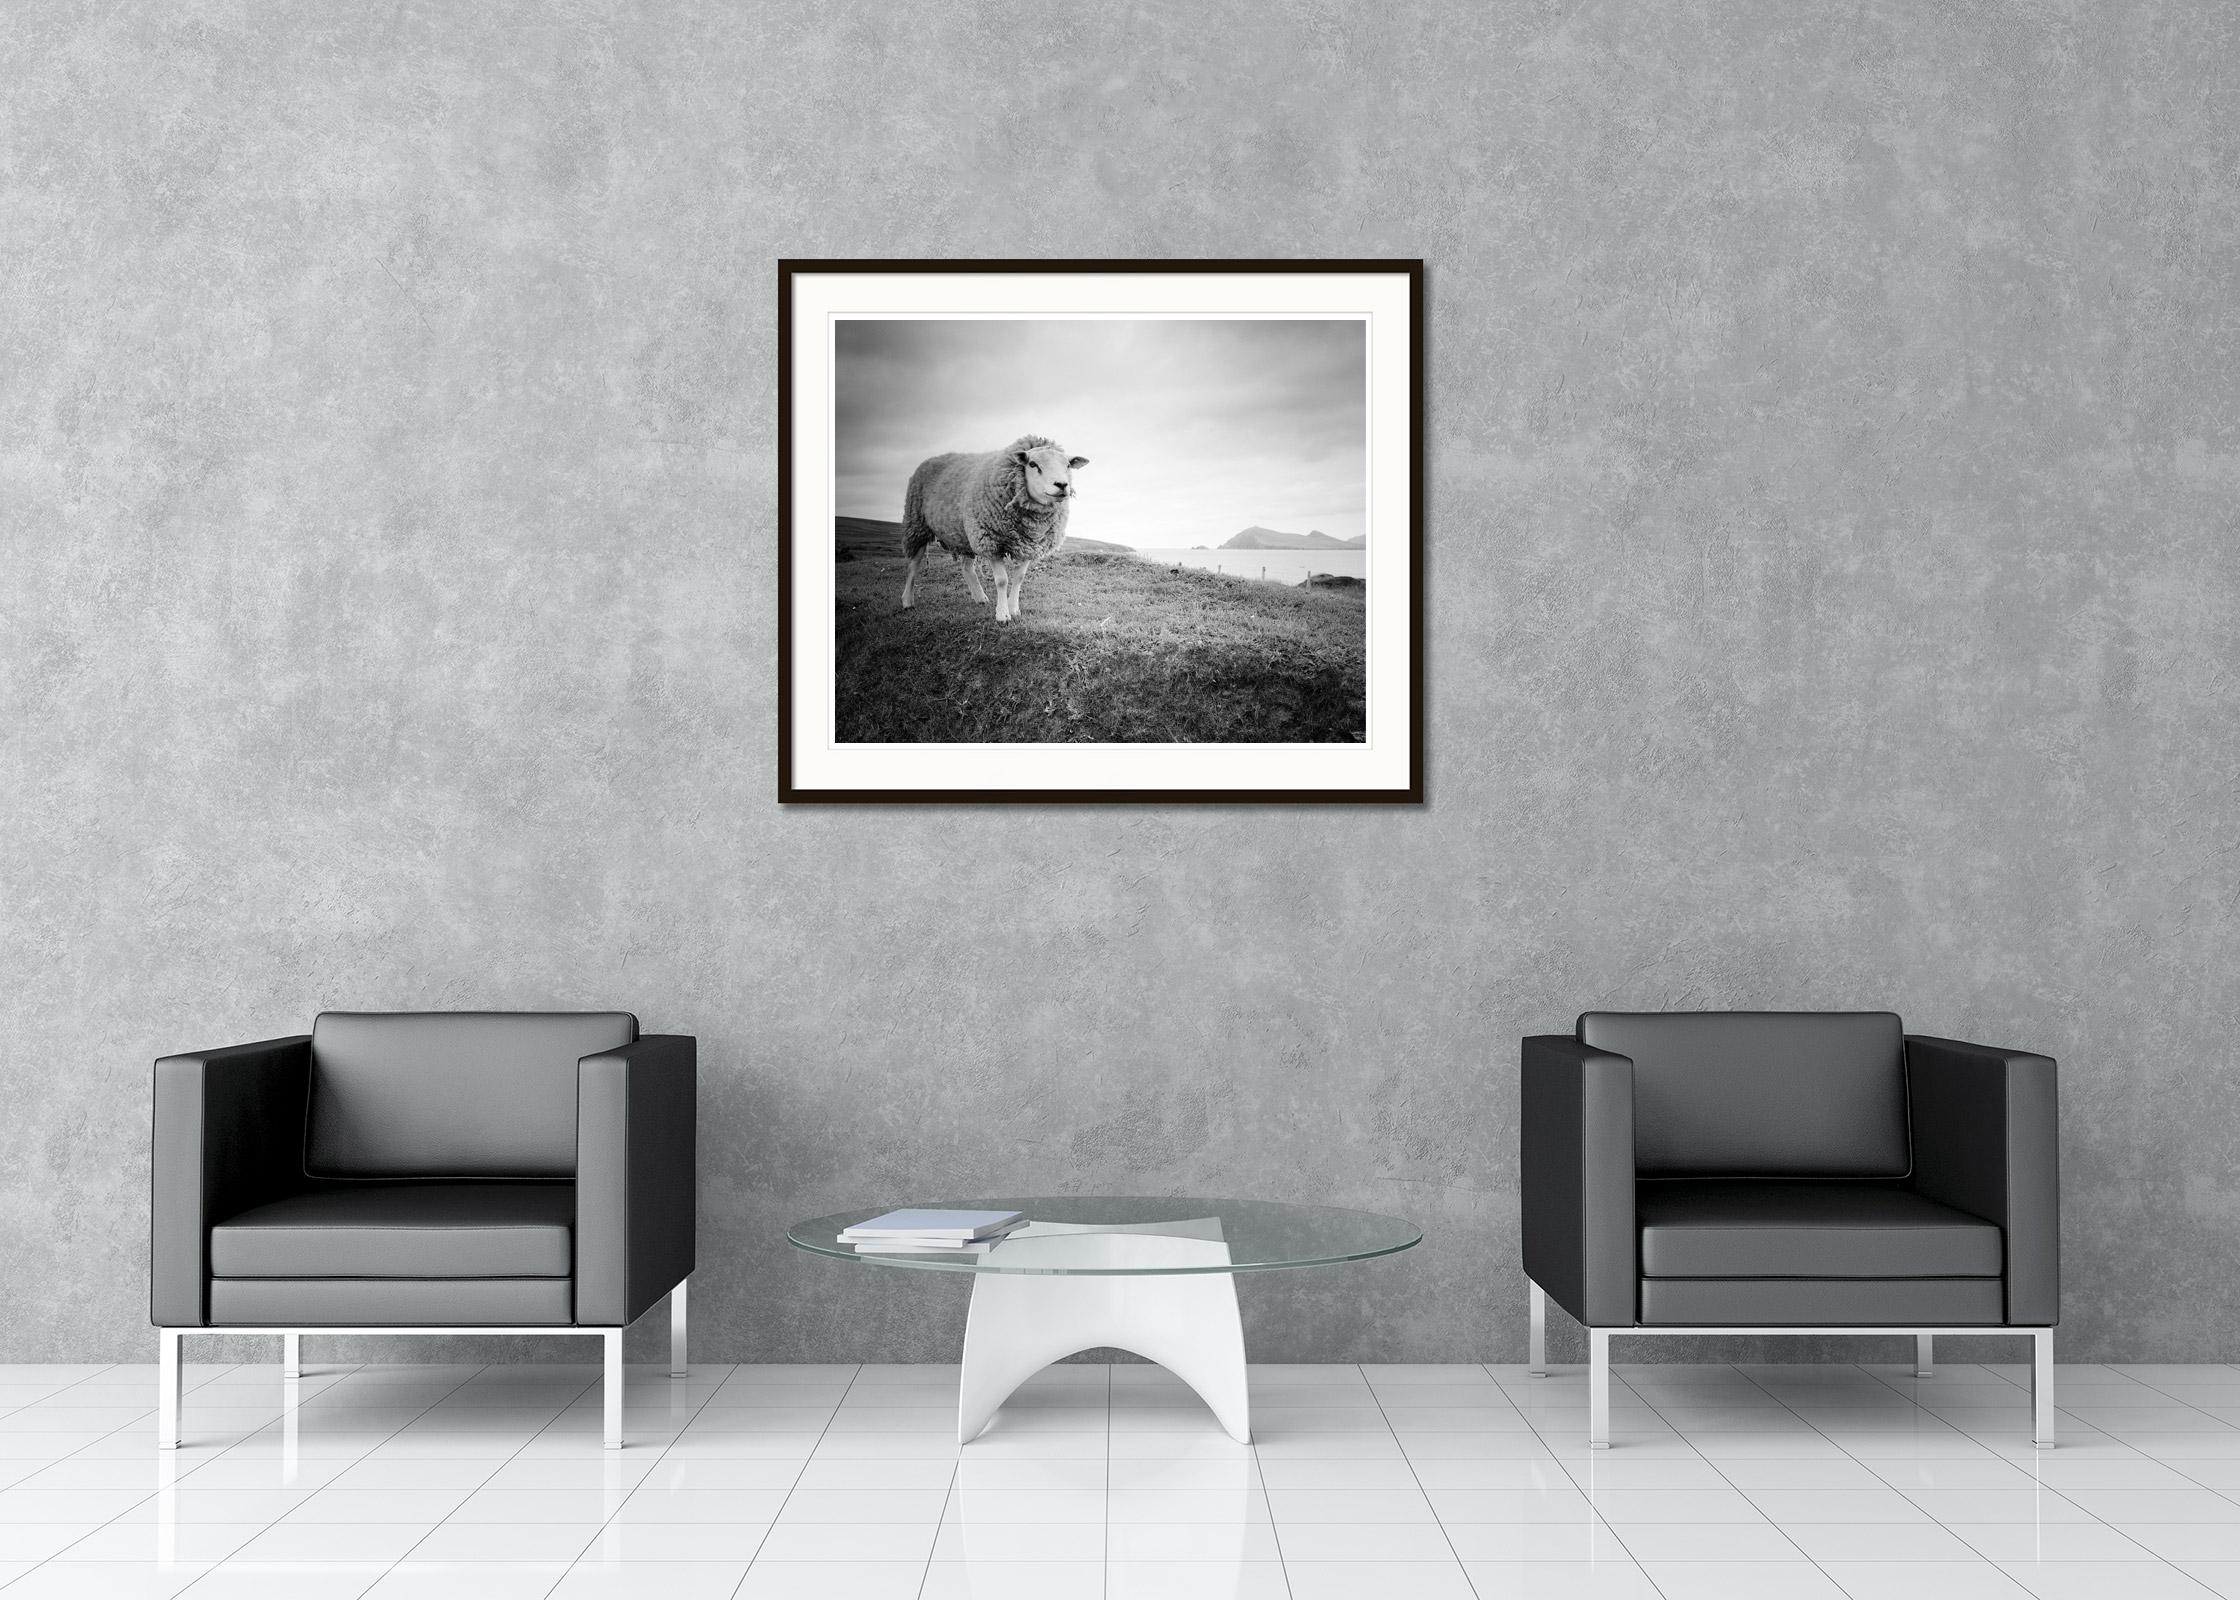 Bucky the Sheep Ireland black and white fine art landscape photography print For Sale 1